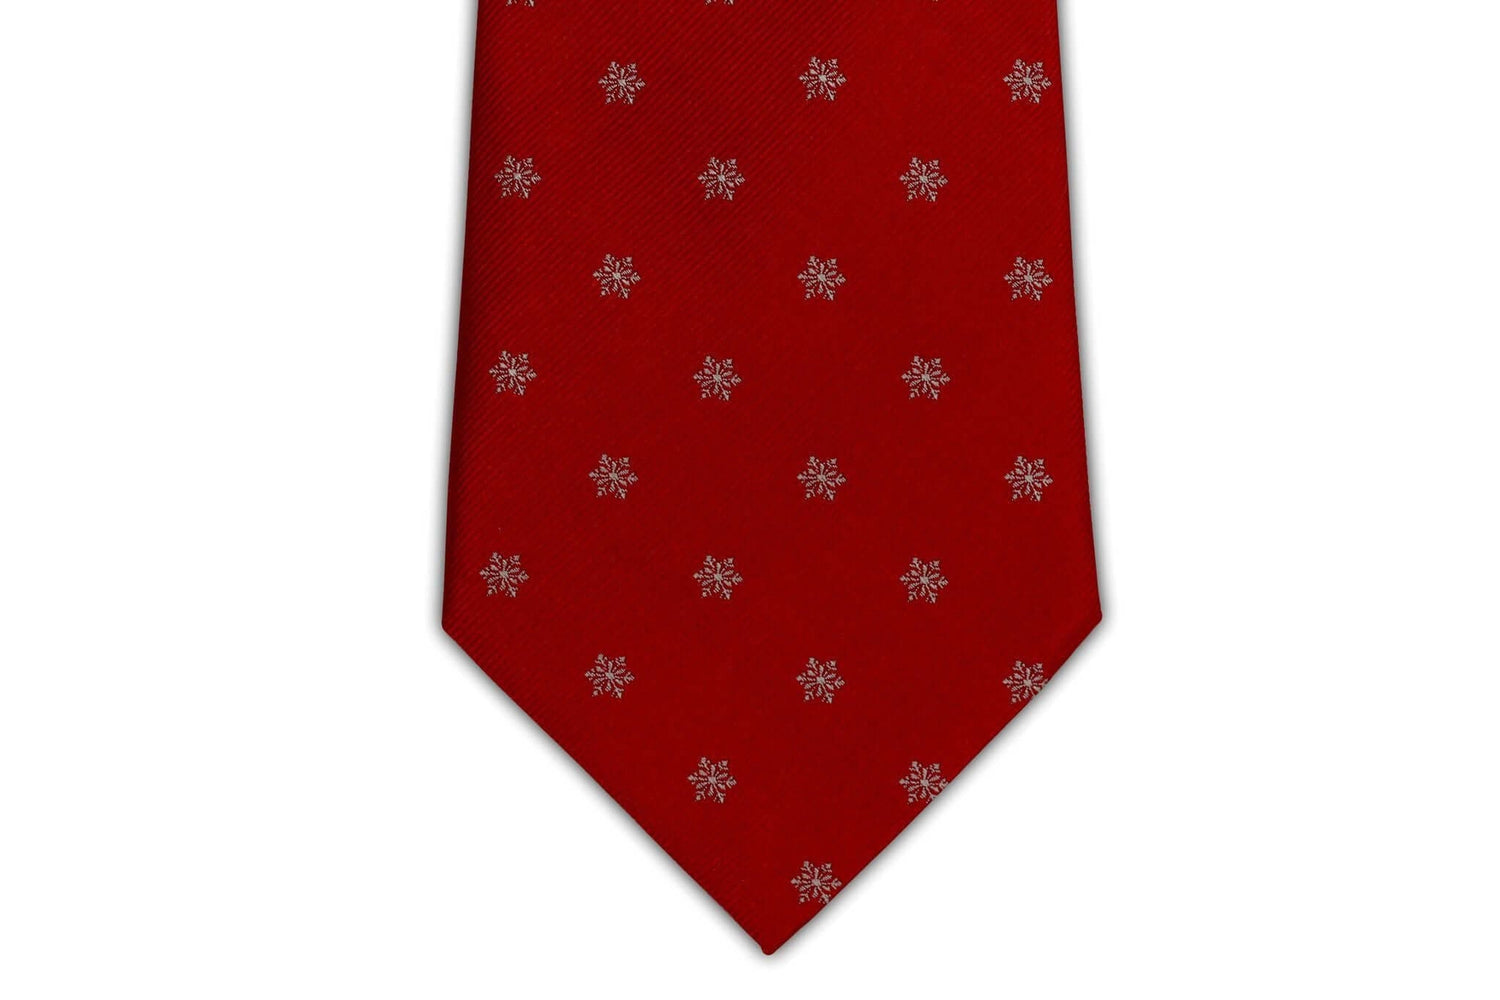 Extra Long Ties - 100% Silk Extra Long Tie With Red Christmas Holiday Snowflake